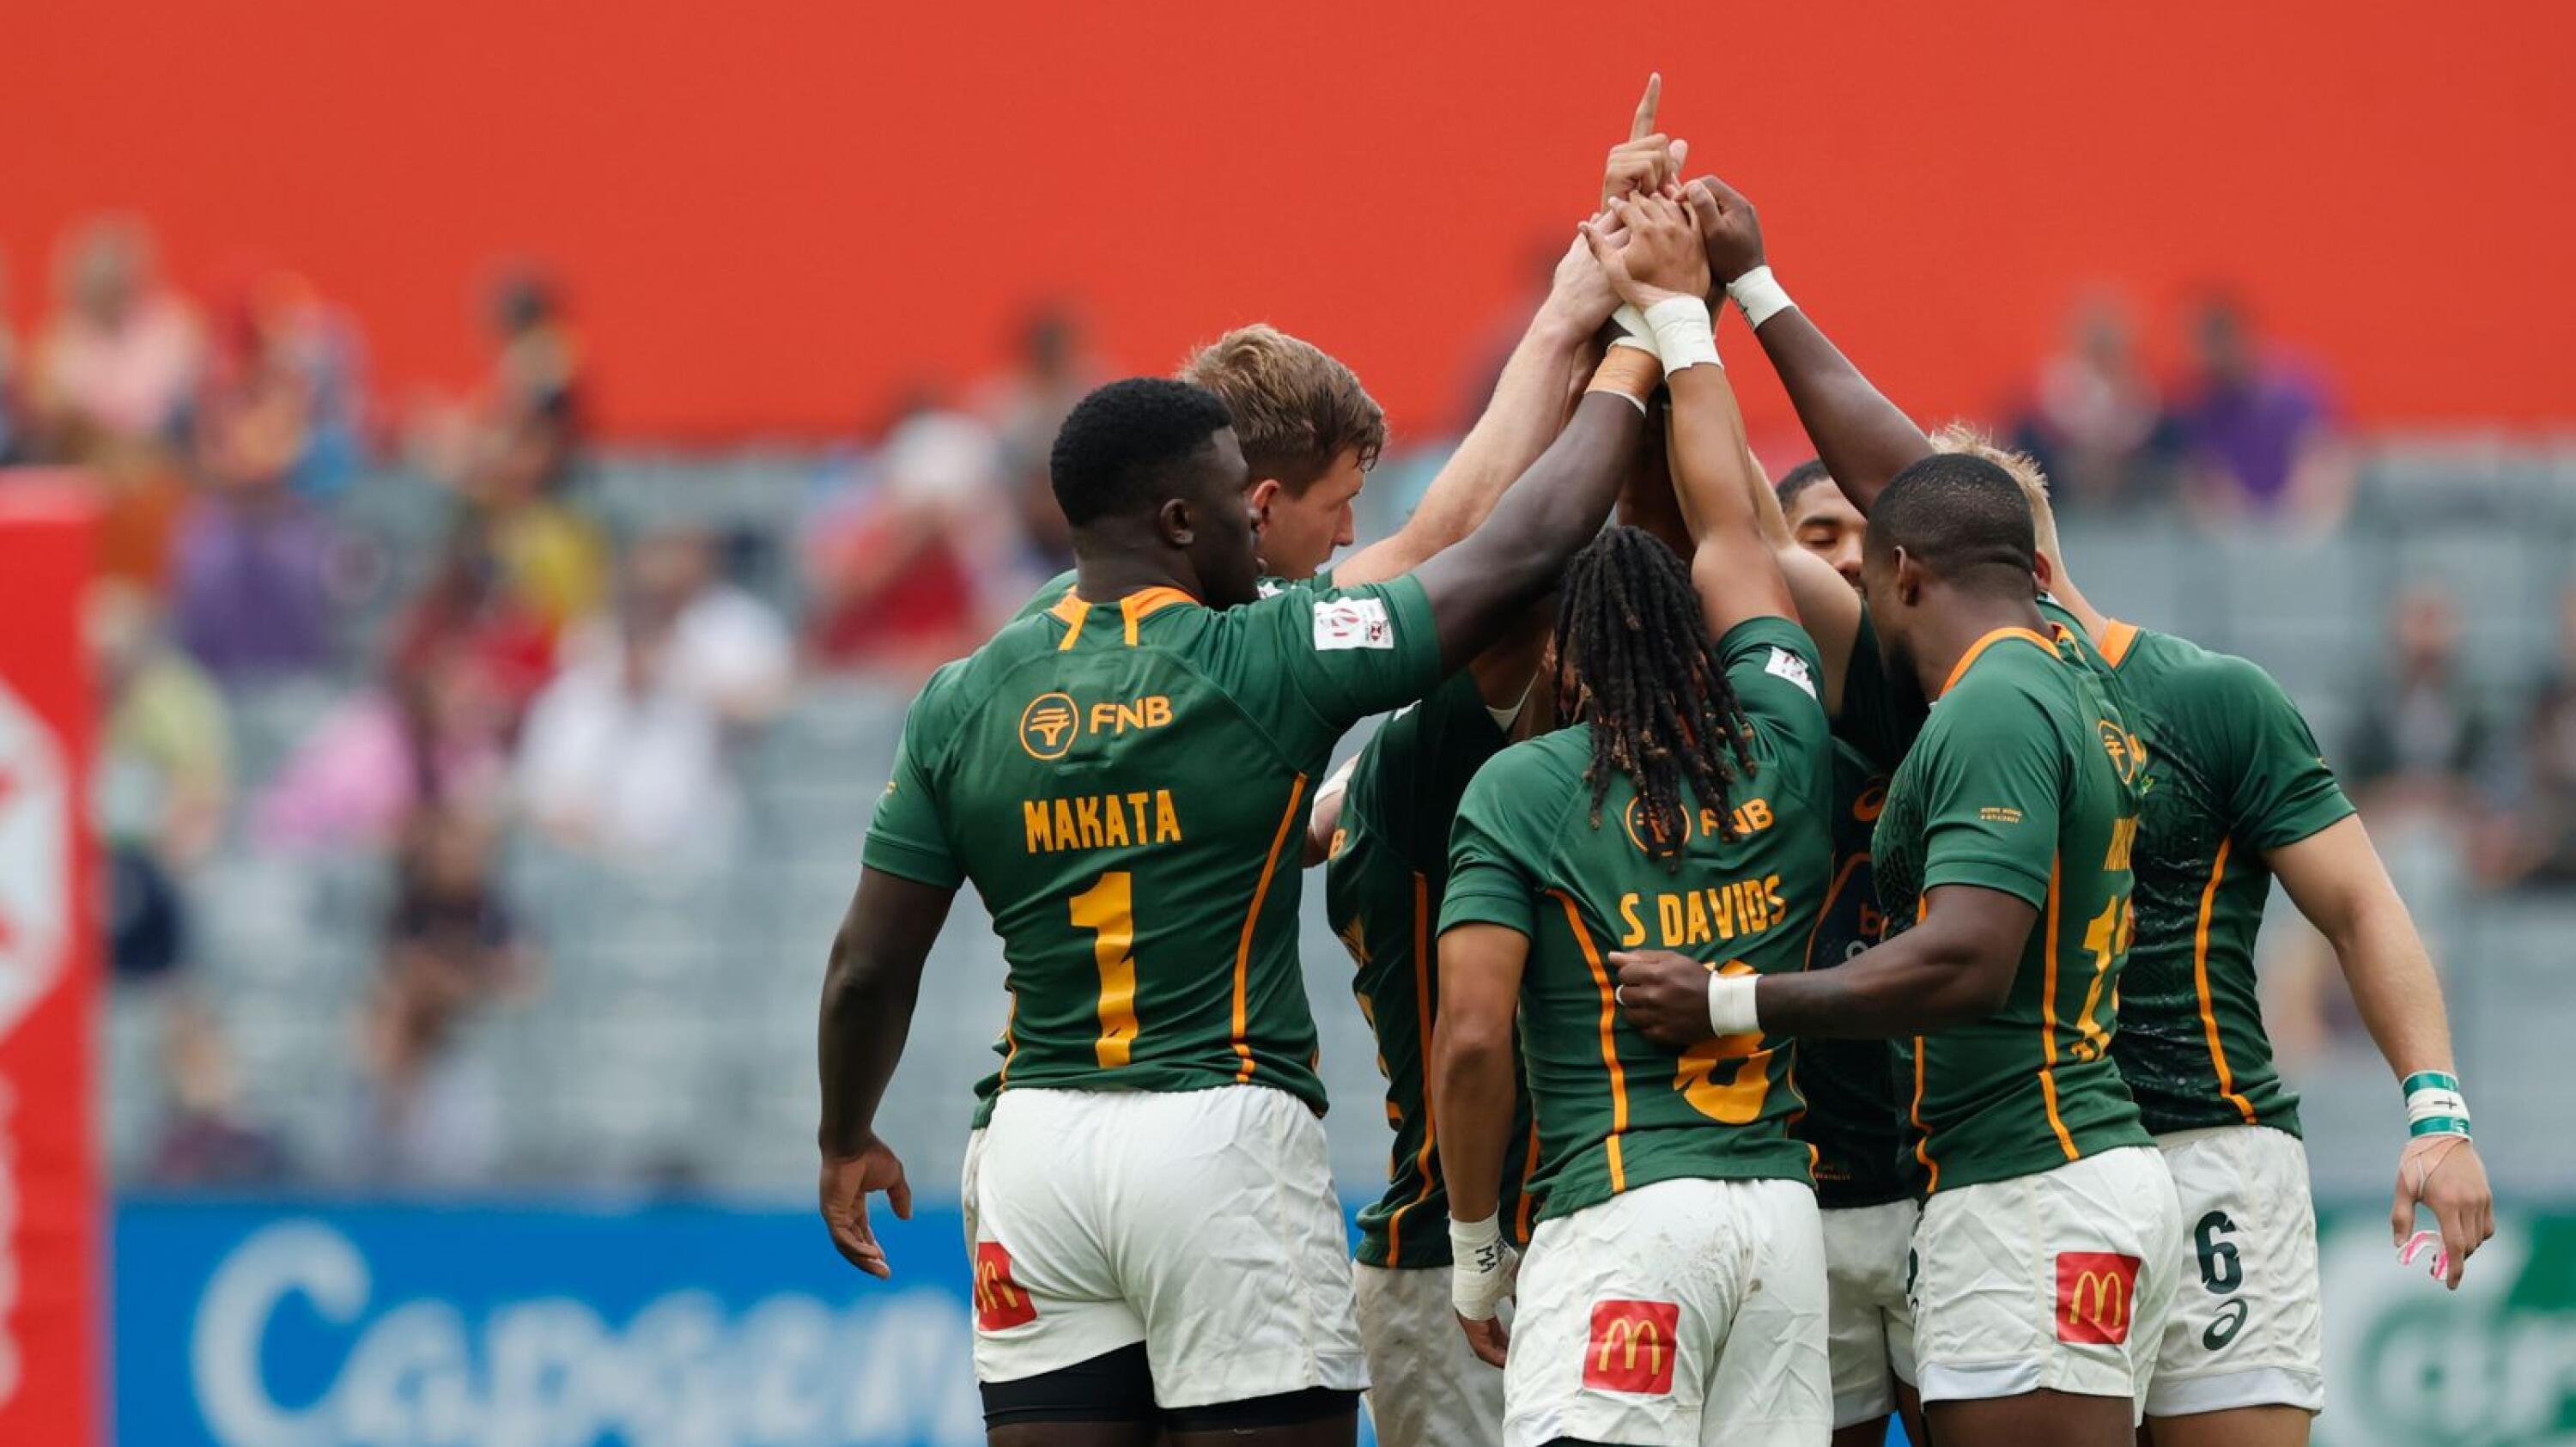 The Blitzboks huddle before a game.